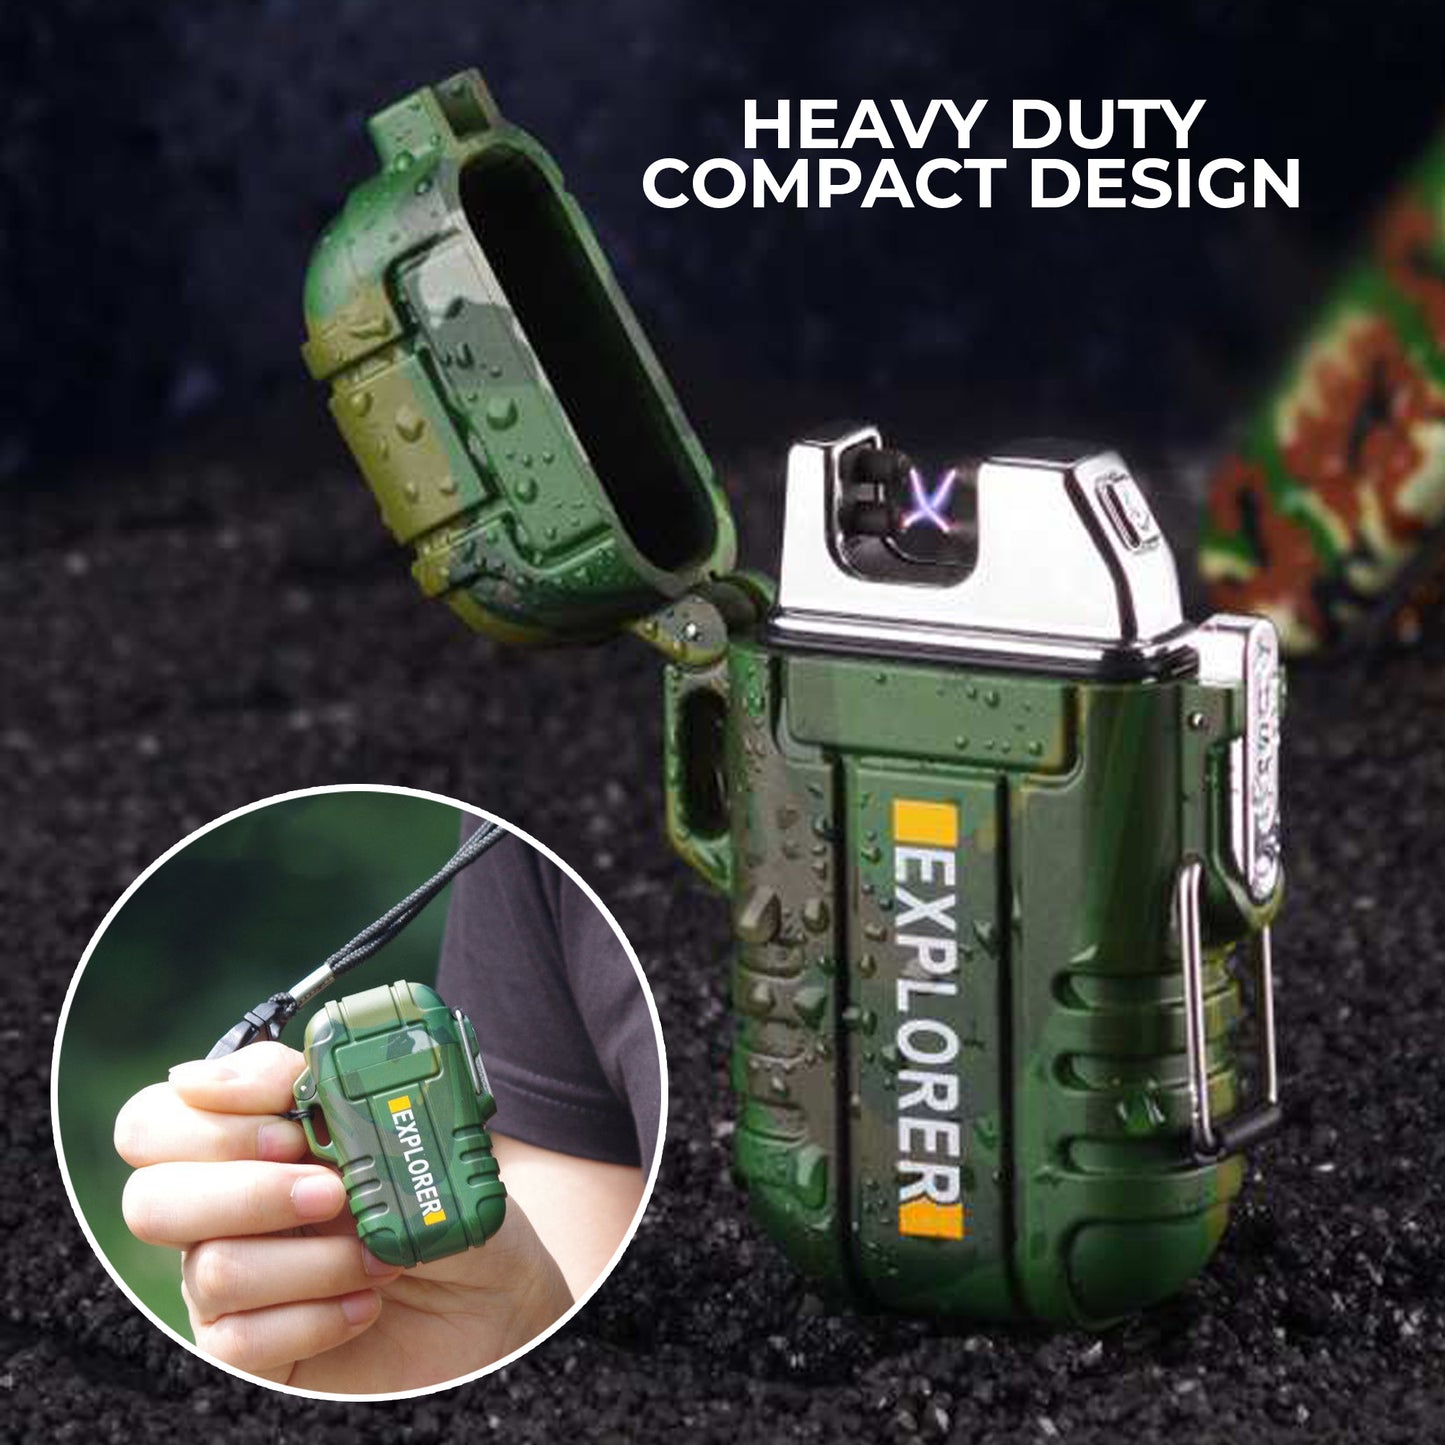 WRADER UPGRADED VERSION WATERPROOF Flameless Electric Lighter Dual Arc Plasma Beam Lighter USB Rechargeable Lighter Windproof Portable Lighter No Butane Ideal Cigarette Lighter for Camping Hiking Travelling and Indoor Outdoor Activities (Military Green)